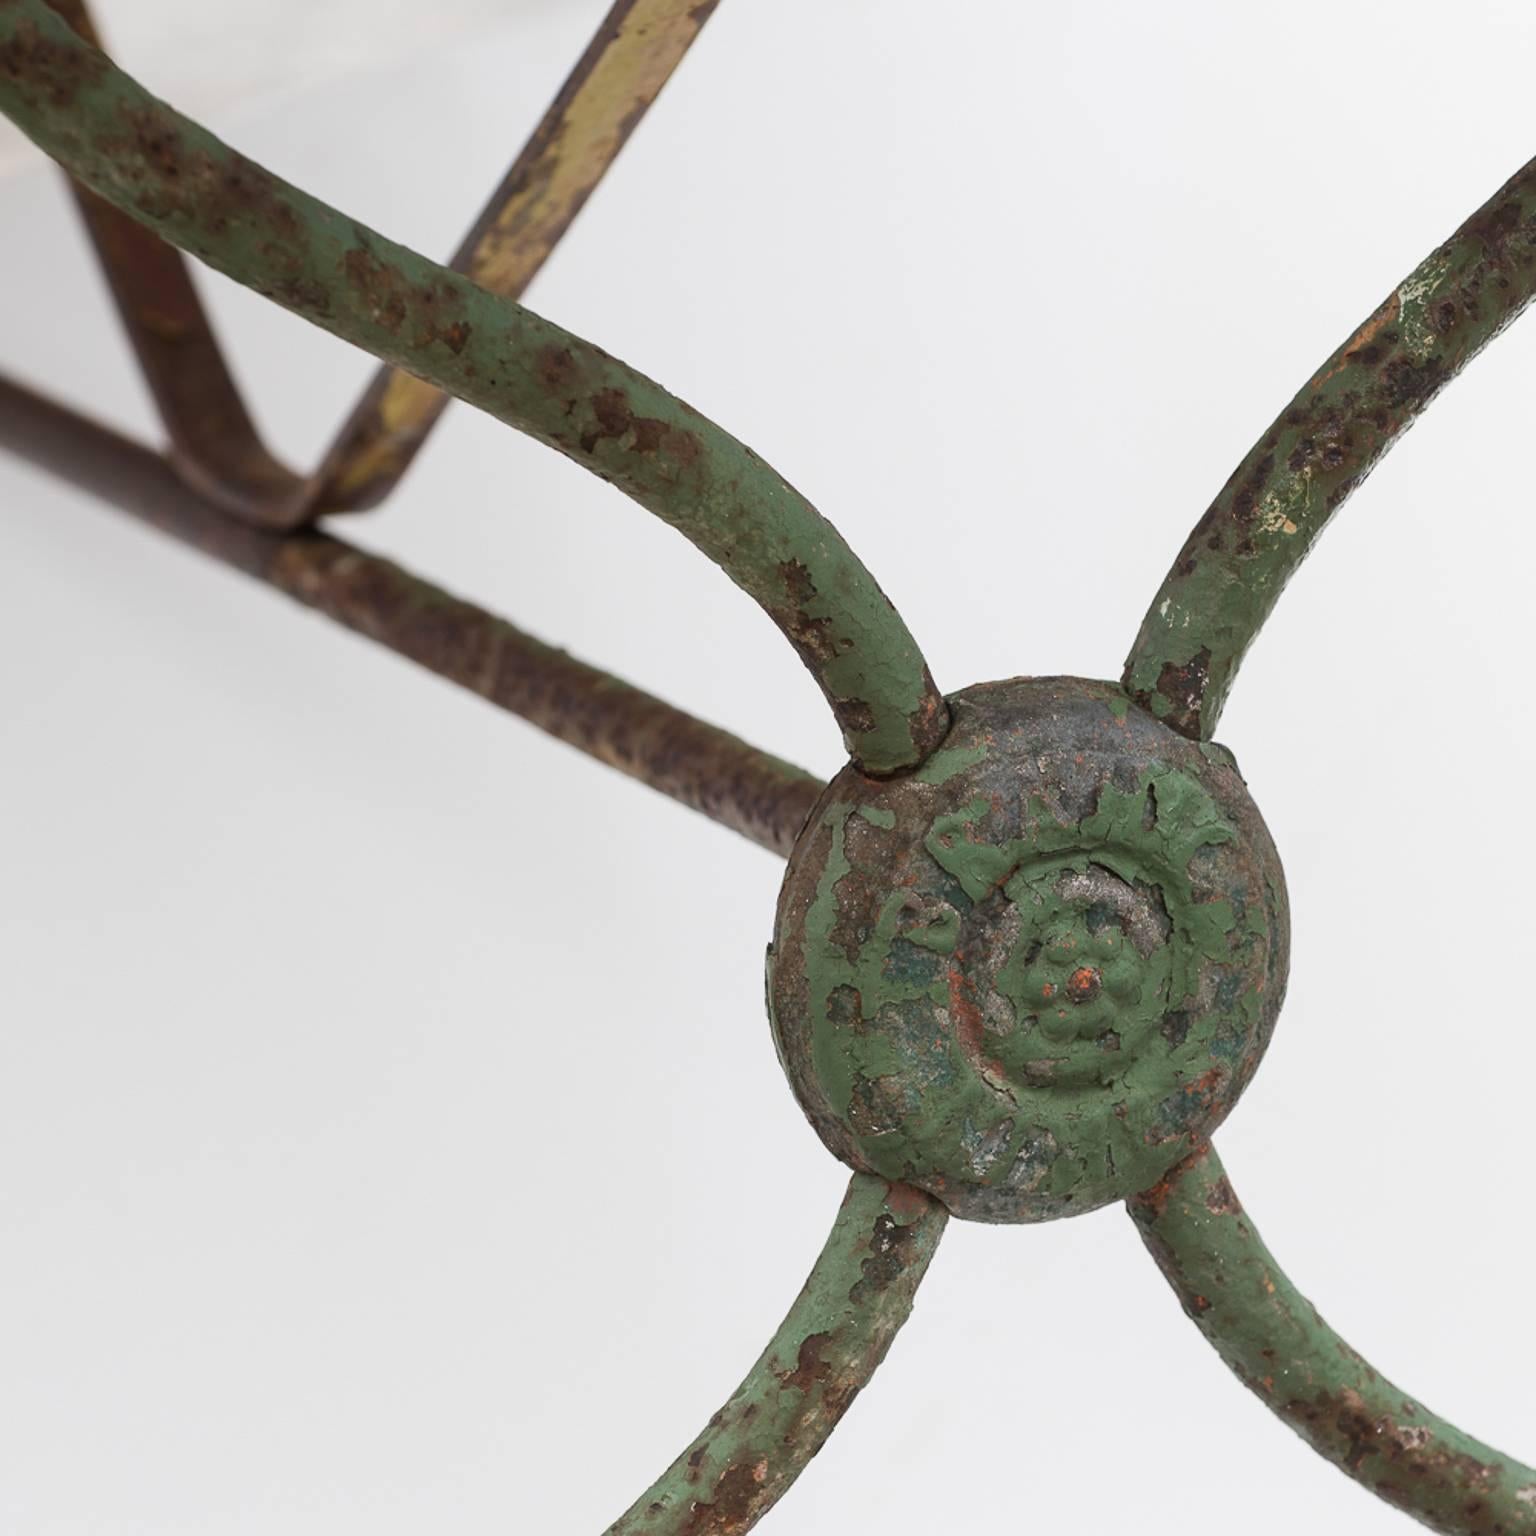 This table is quite unusual with a wrought iron base consisting of four legs with centre medallions, and feet that are typical of the late 19th century in France. It is marked “Brahic Nimes” and was made in that village in Provence. The green paint